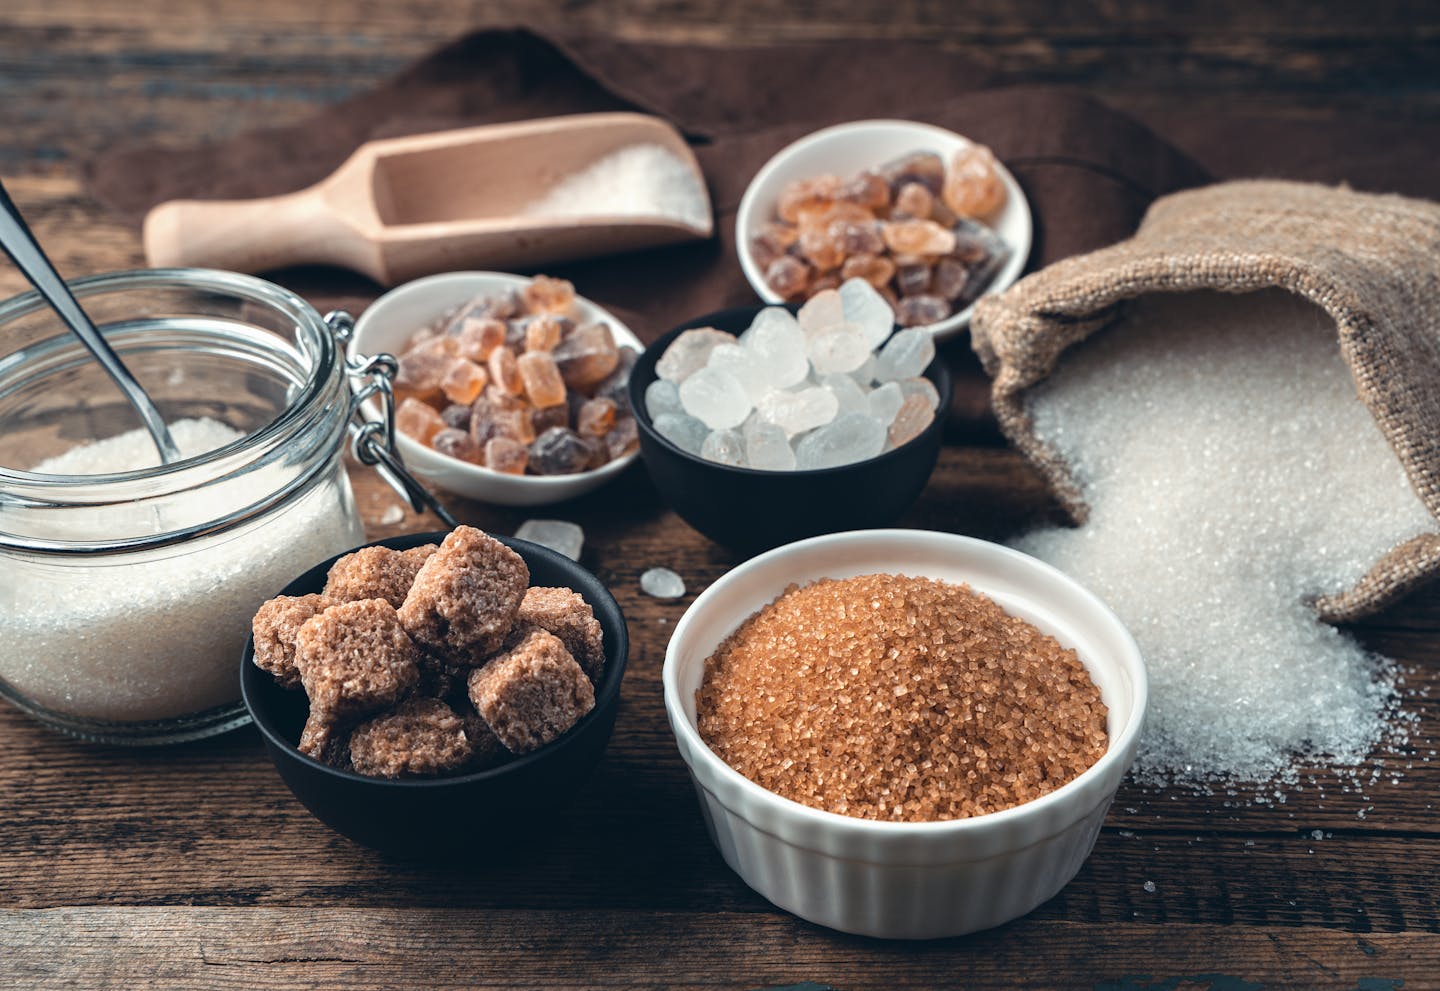 Different types of sugars in bowls, scoops and bags on a wooden table.